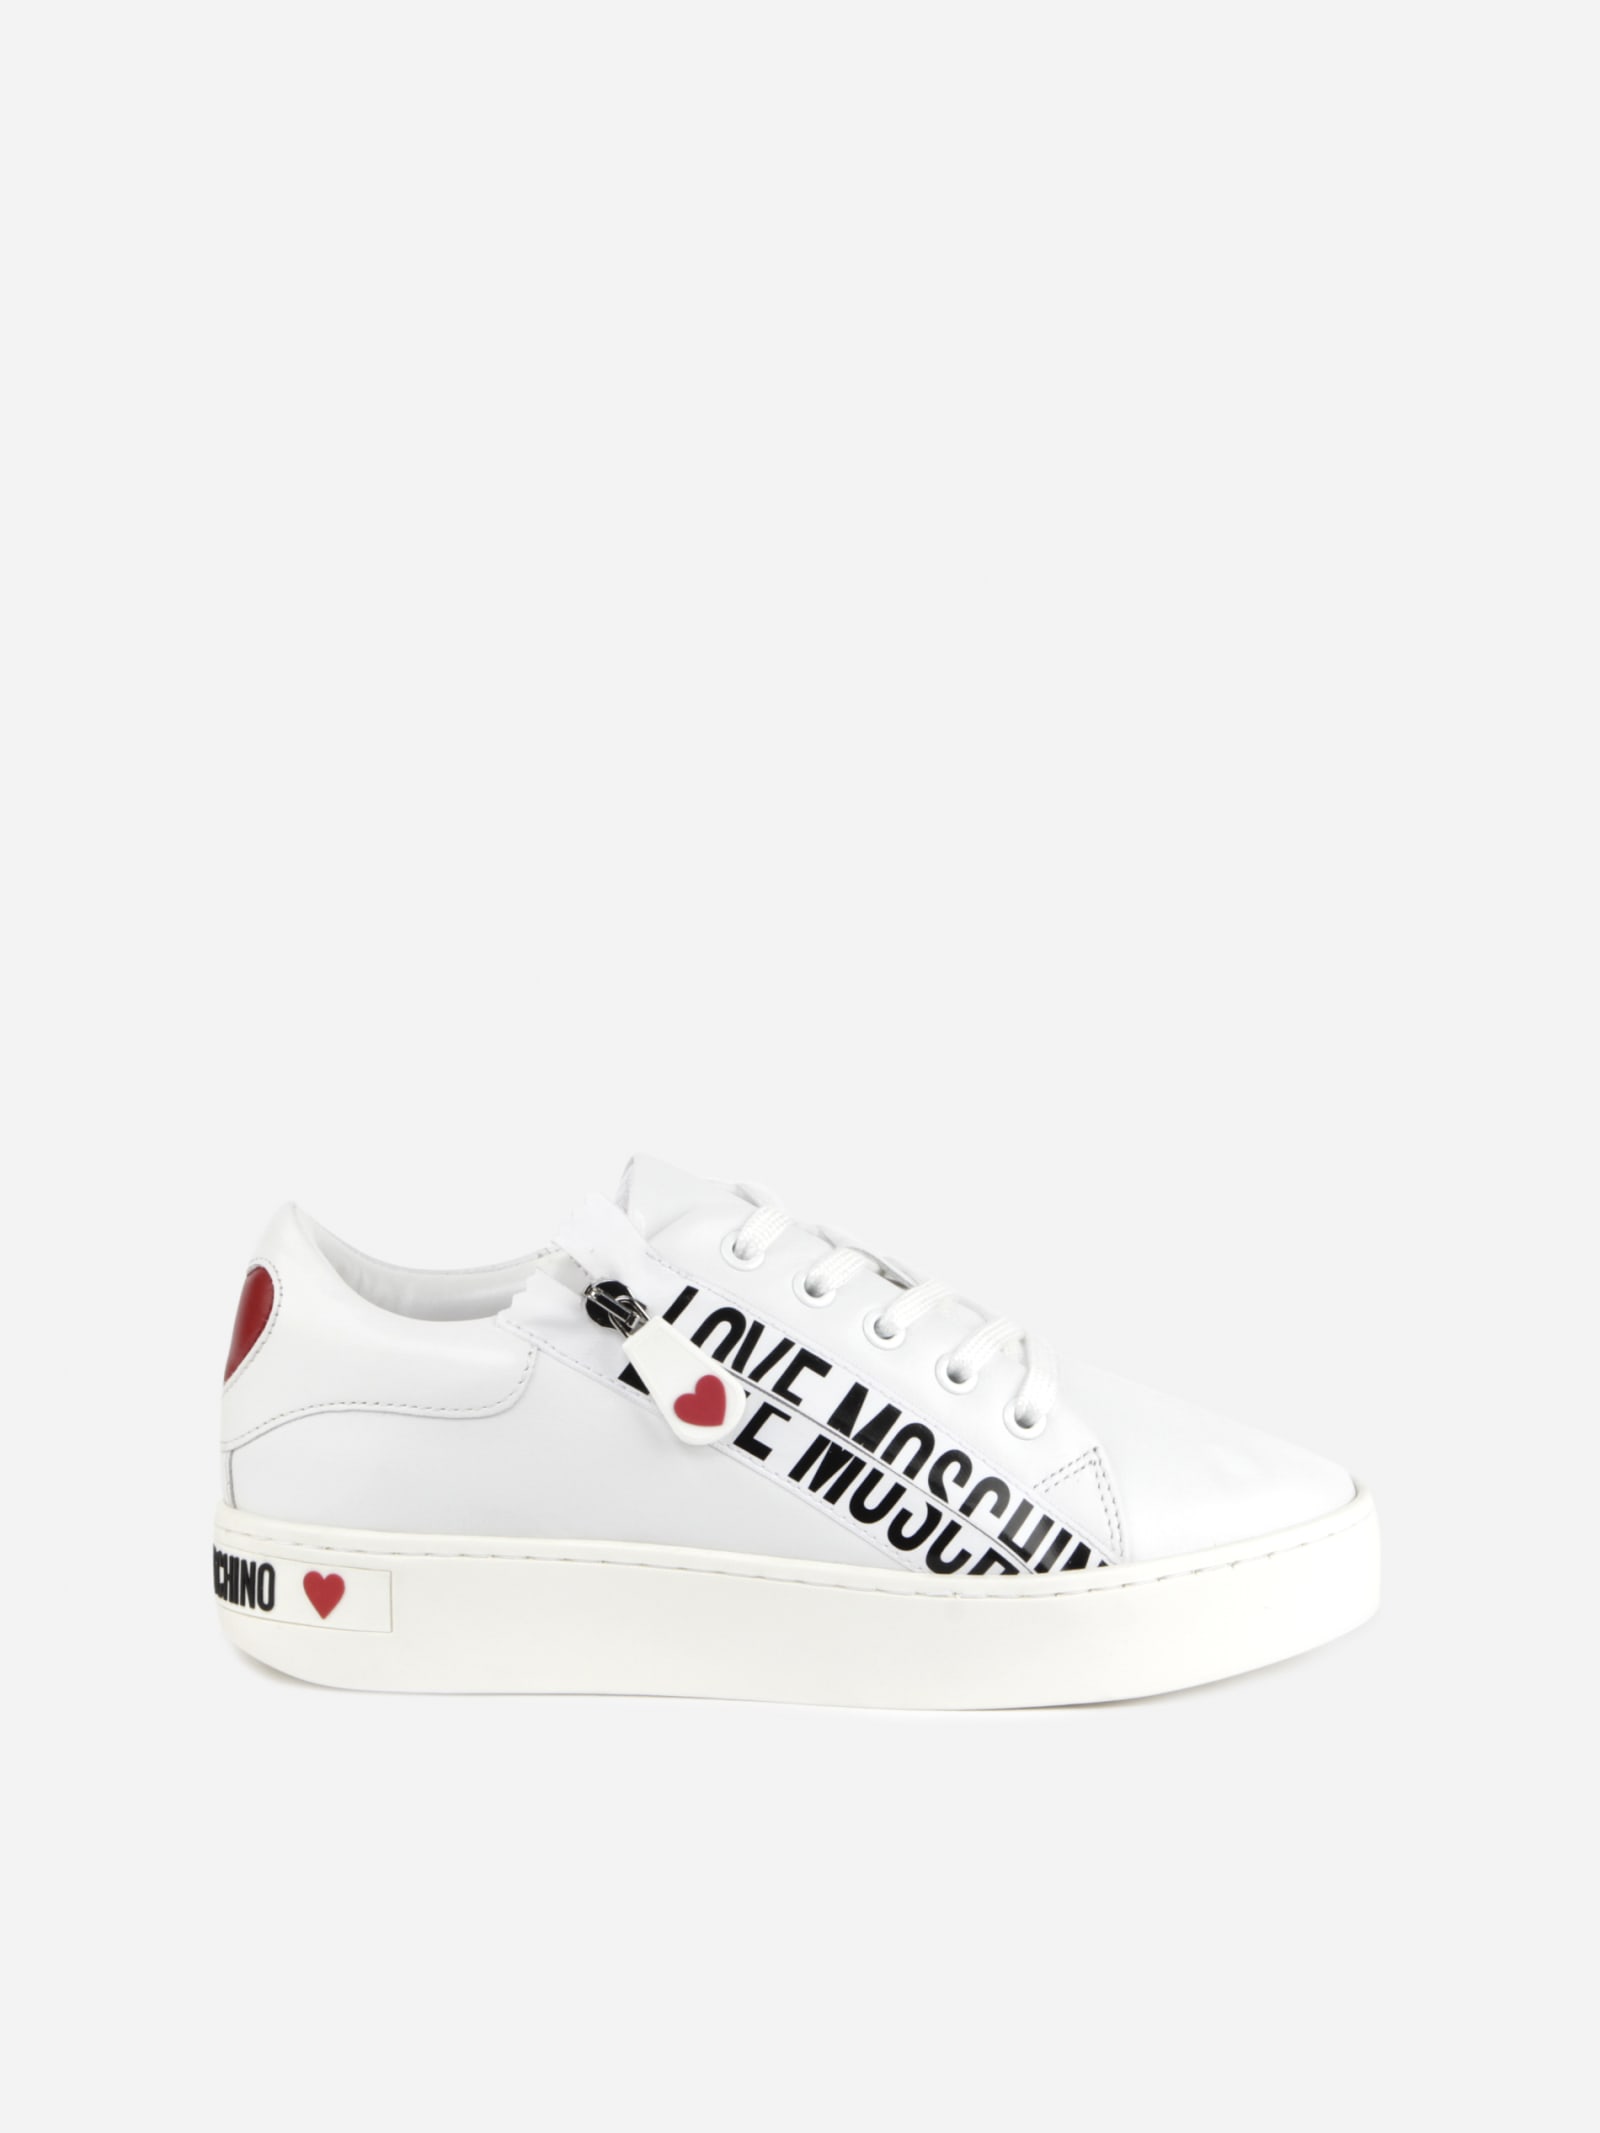 Buy Love Moschino Leather Sneakers With Side Zips online, shop Love Moschino shoes with free shipping